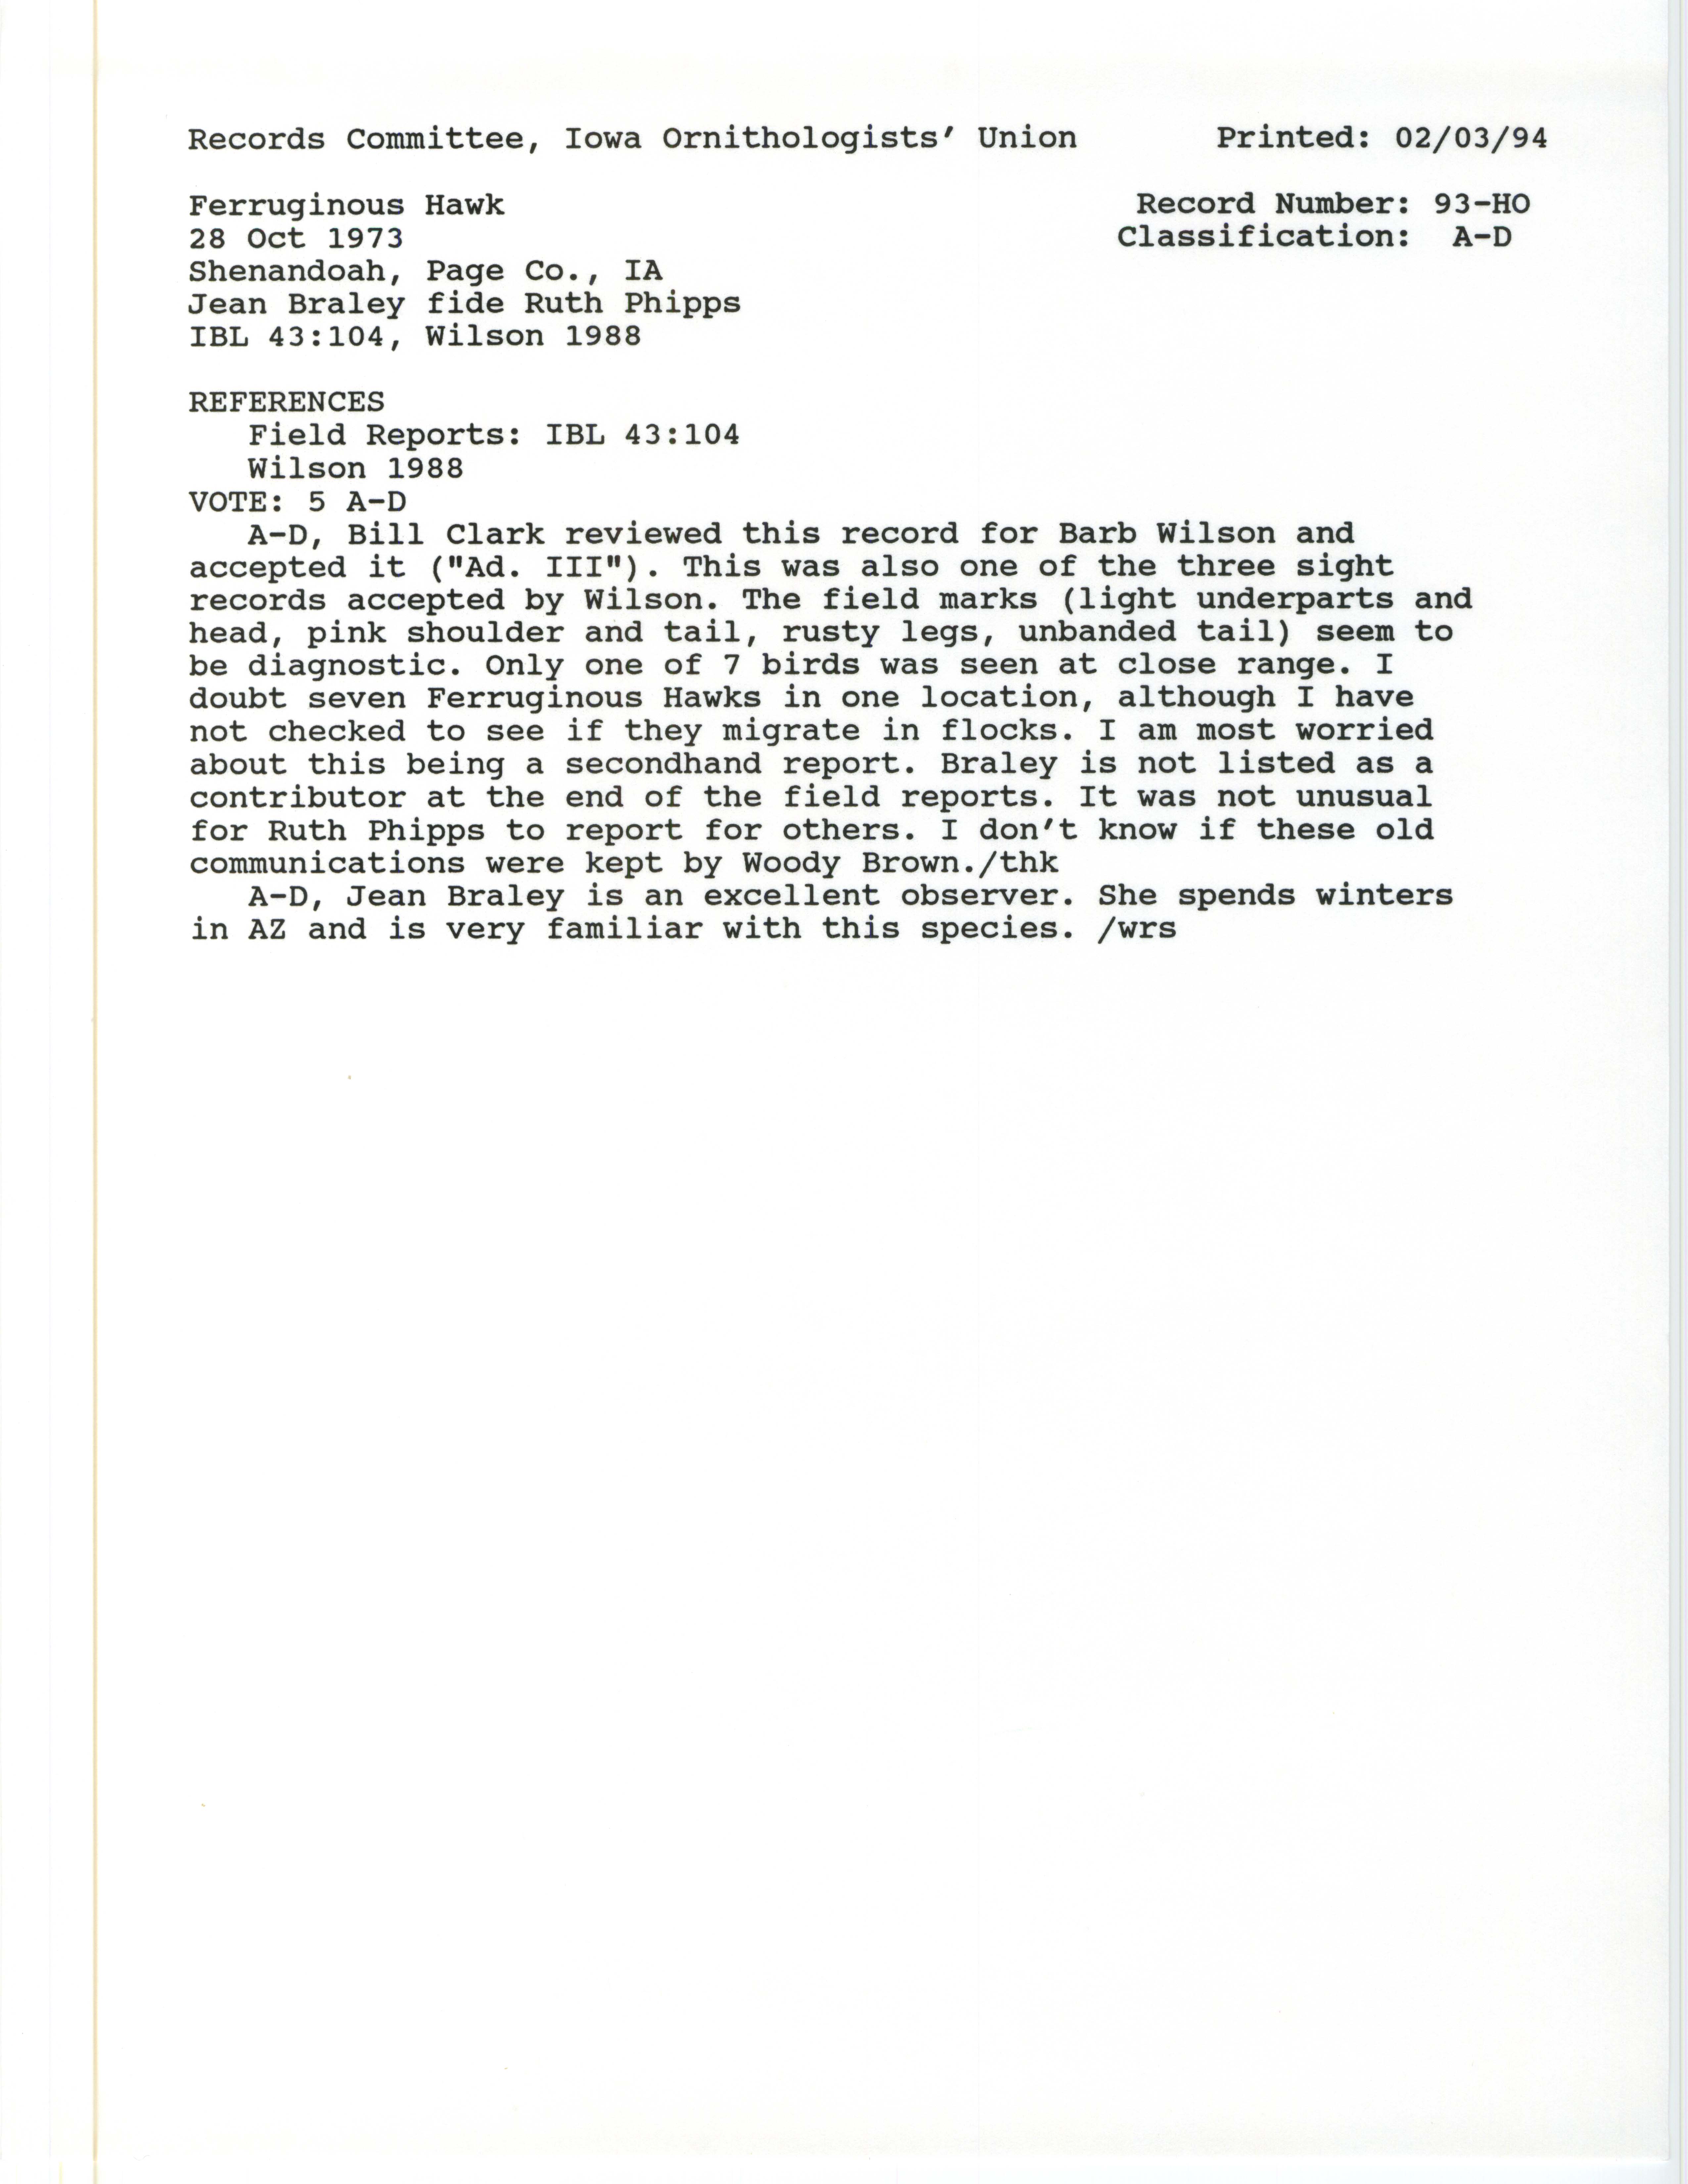 Records Committee review for rare bird sighting for Ferruginous Hawk at Shenandoah in 1973